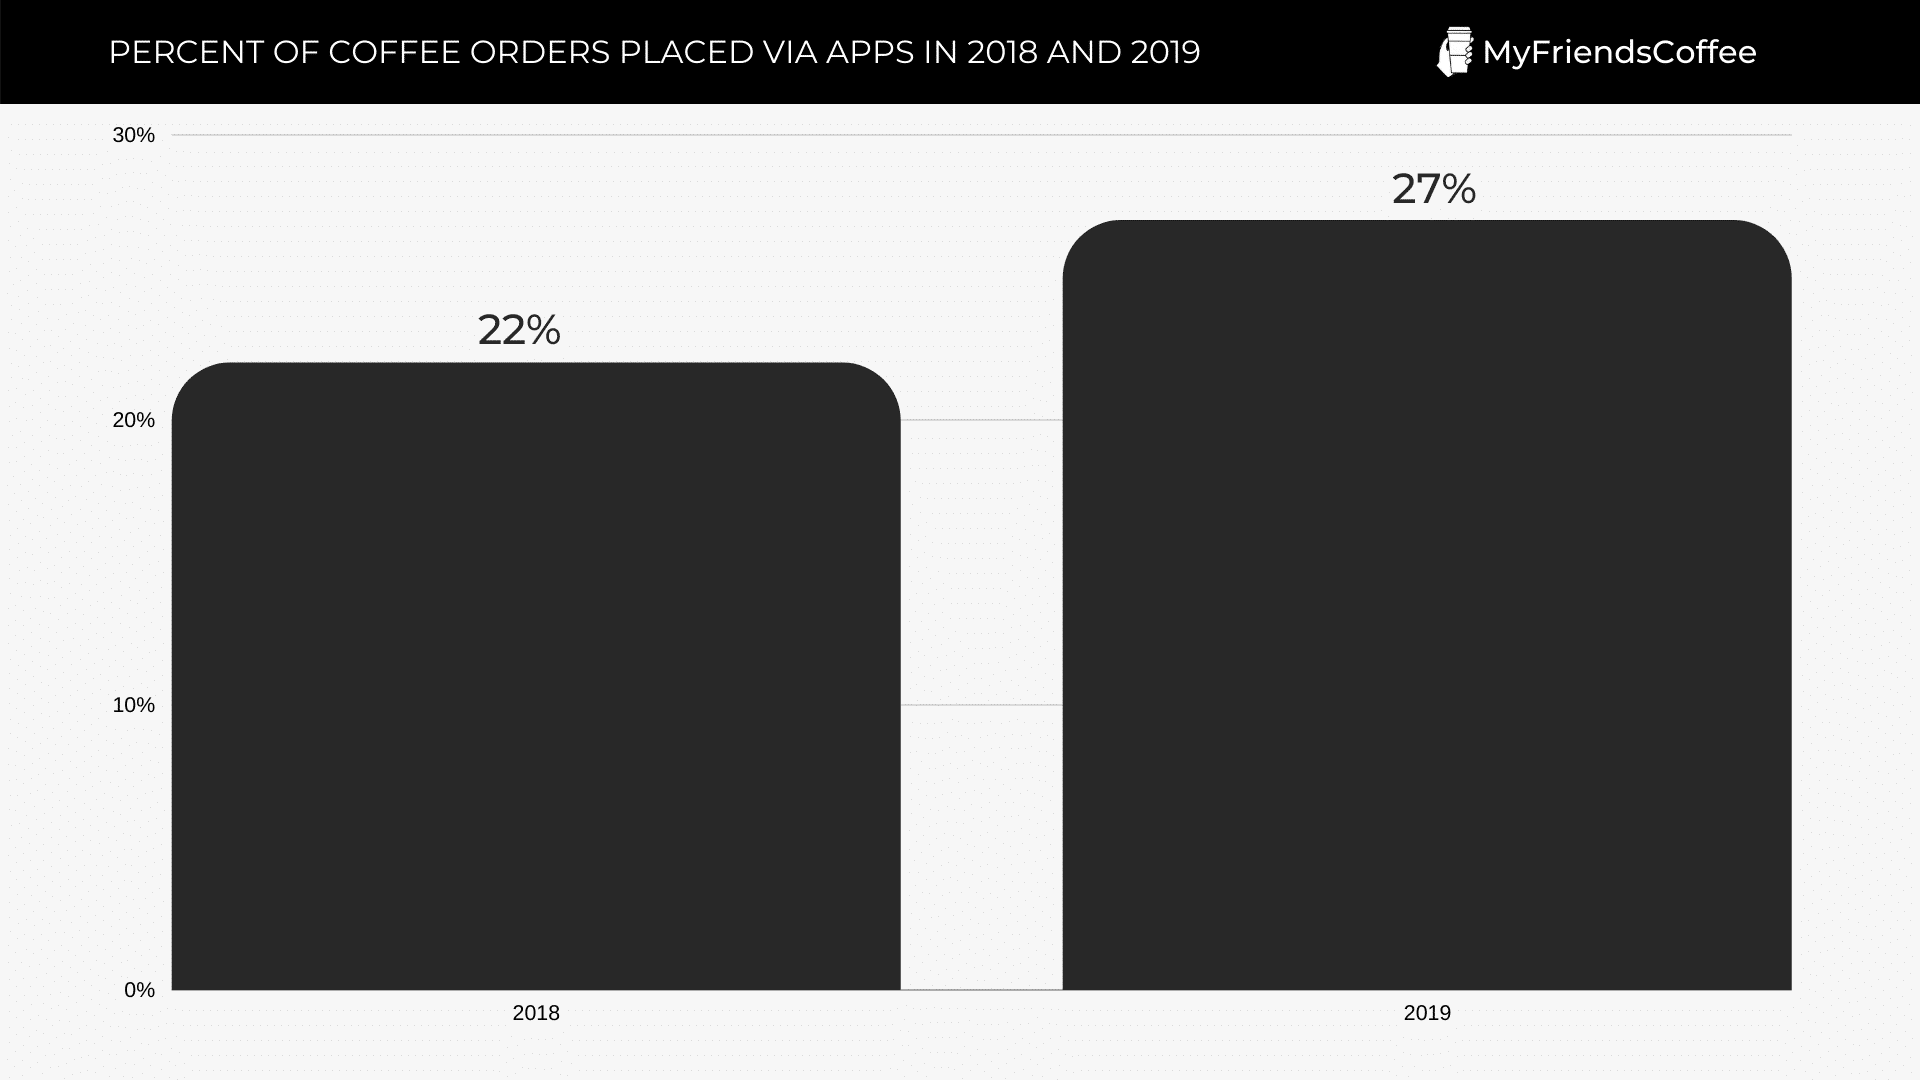 PERCENT OF COFFEE ORDERS PLACED VIA APPS IN 2018 AND 2019